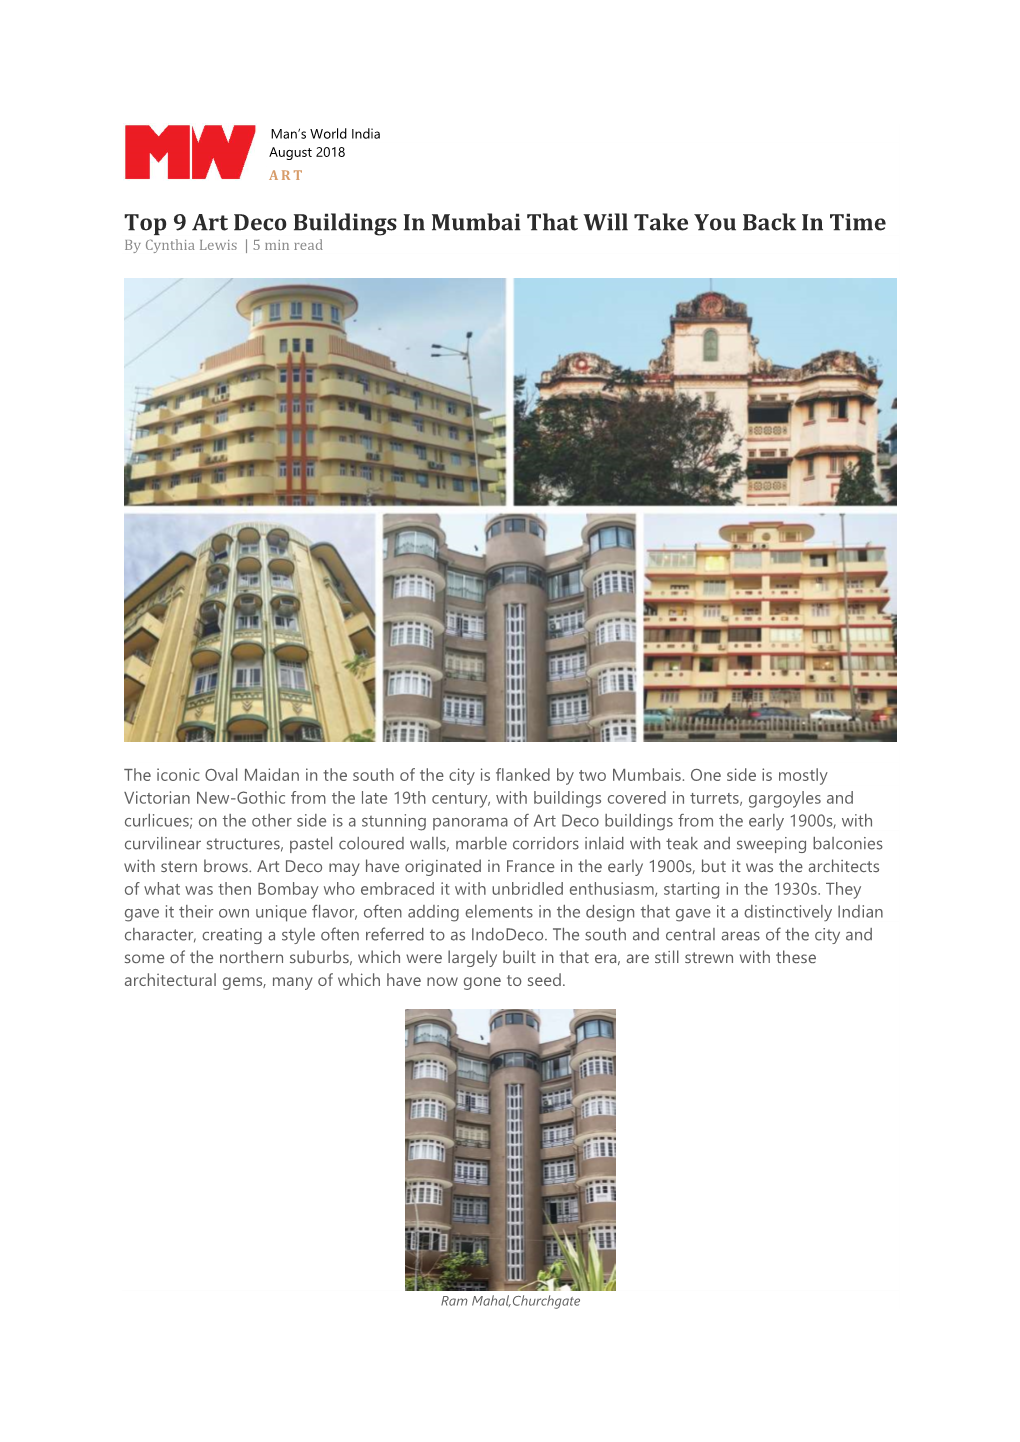 Top 9 Art Deco Buildings in Mumbai That Will Take You Back in Time by Cynthia Lewis | 5 Min Read